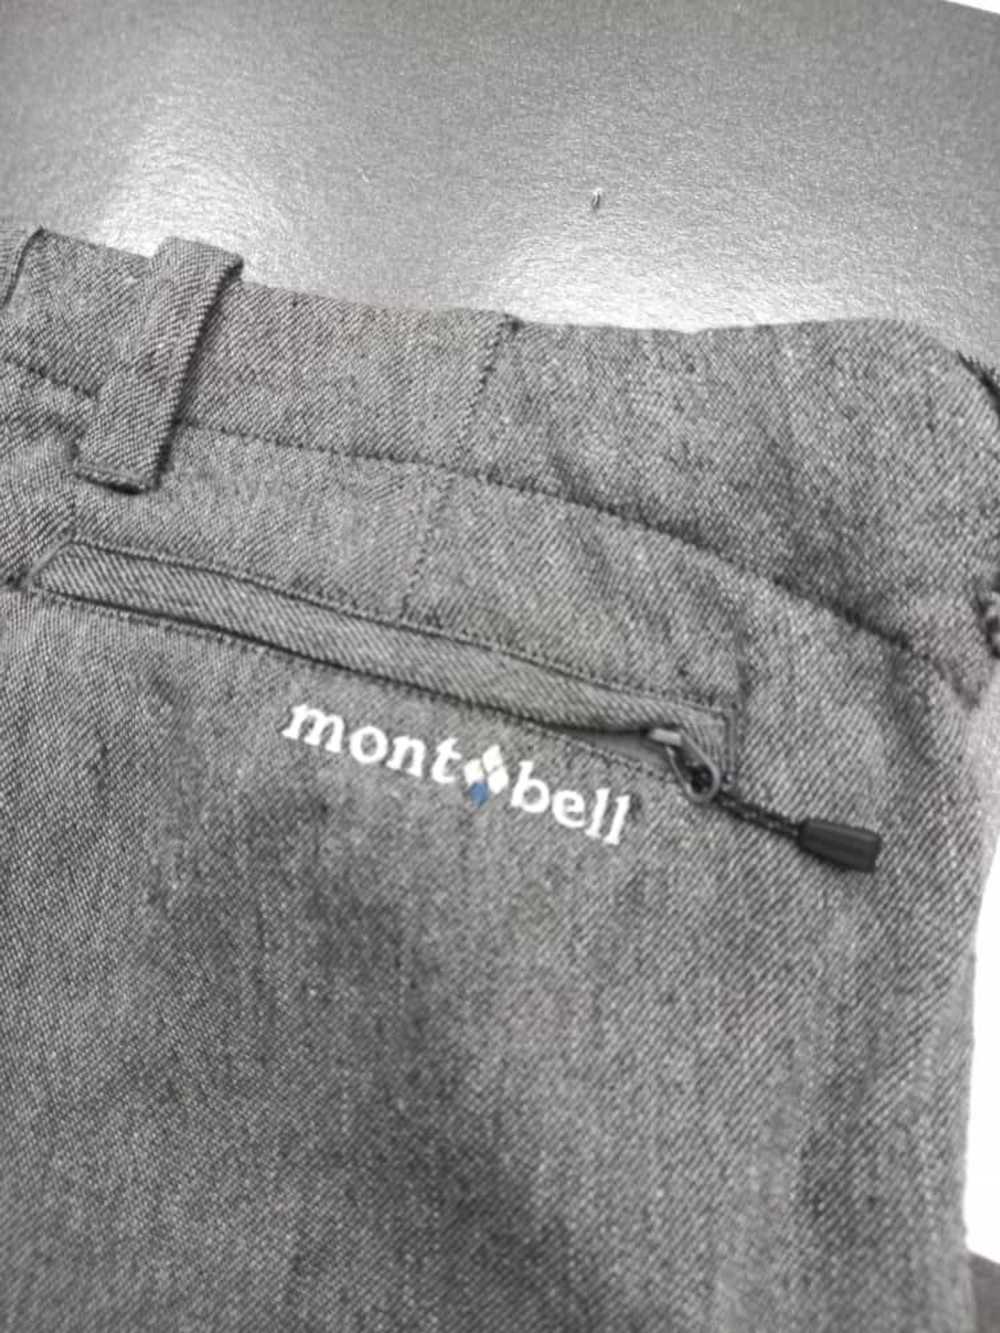 Montbell × Outdoor Life Montbell Wool Pants - image 9